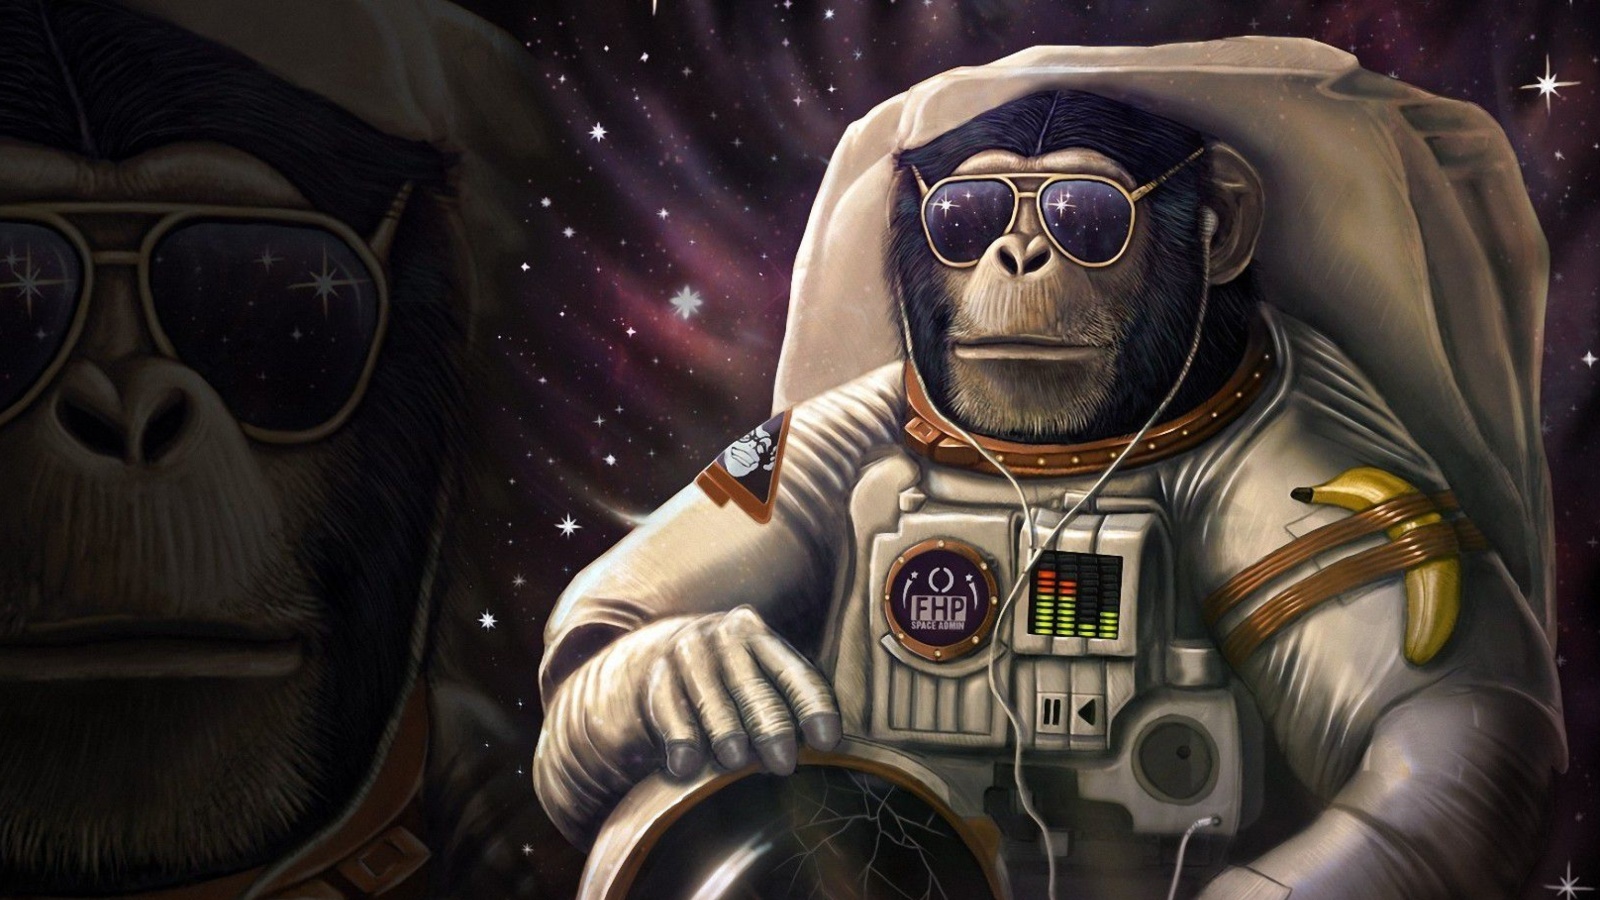 Monkeys and apes in space screenshot #1 1600x900